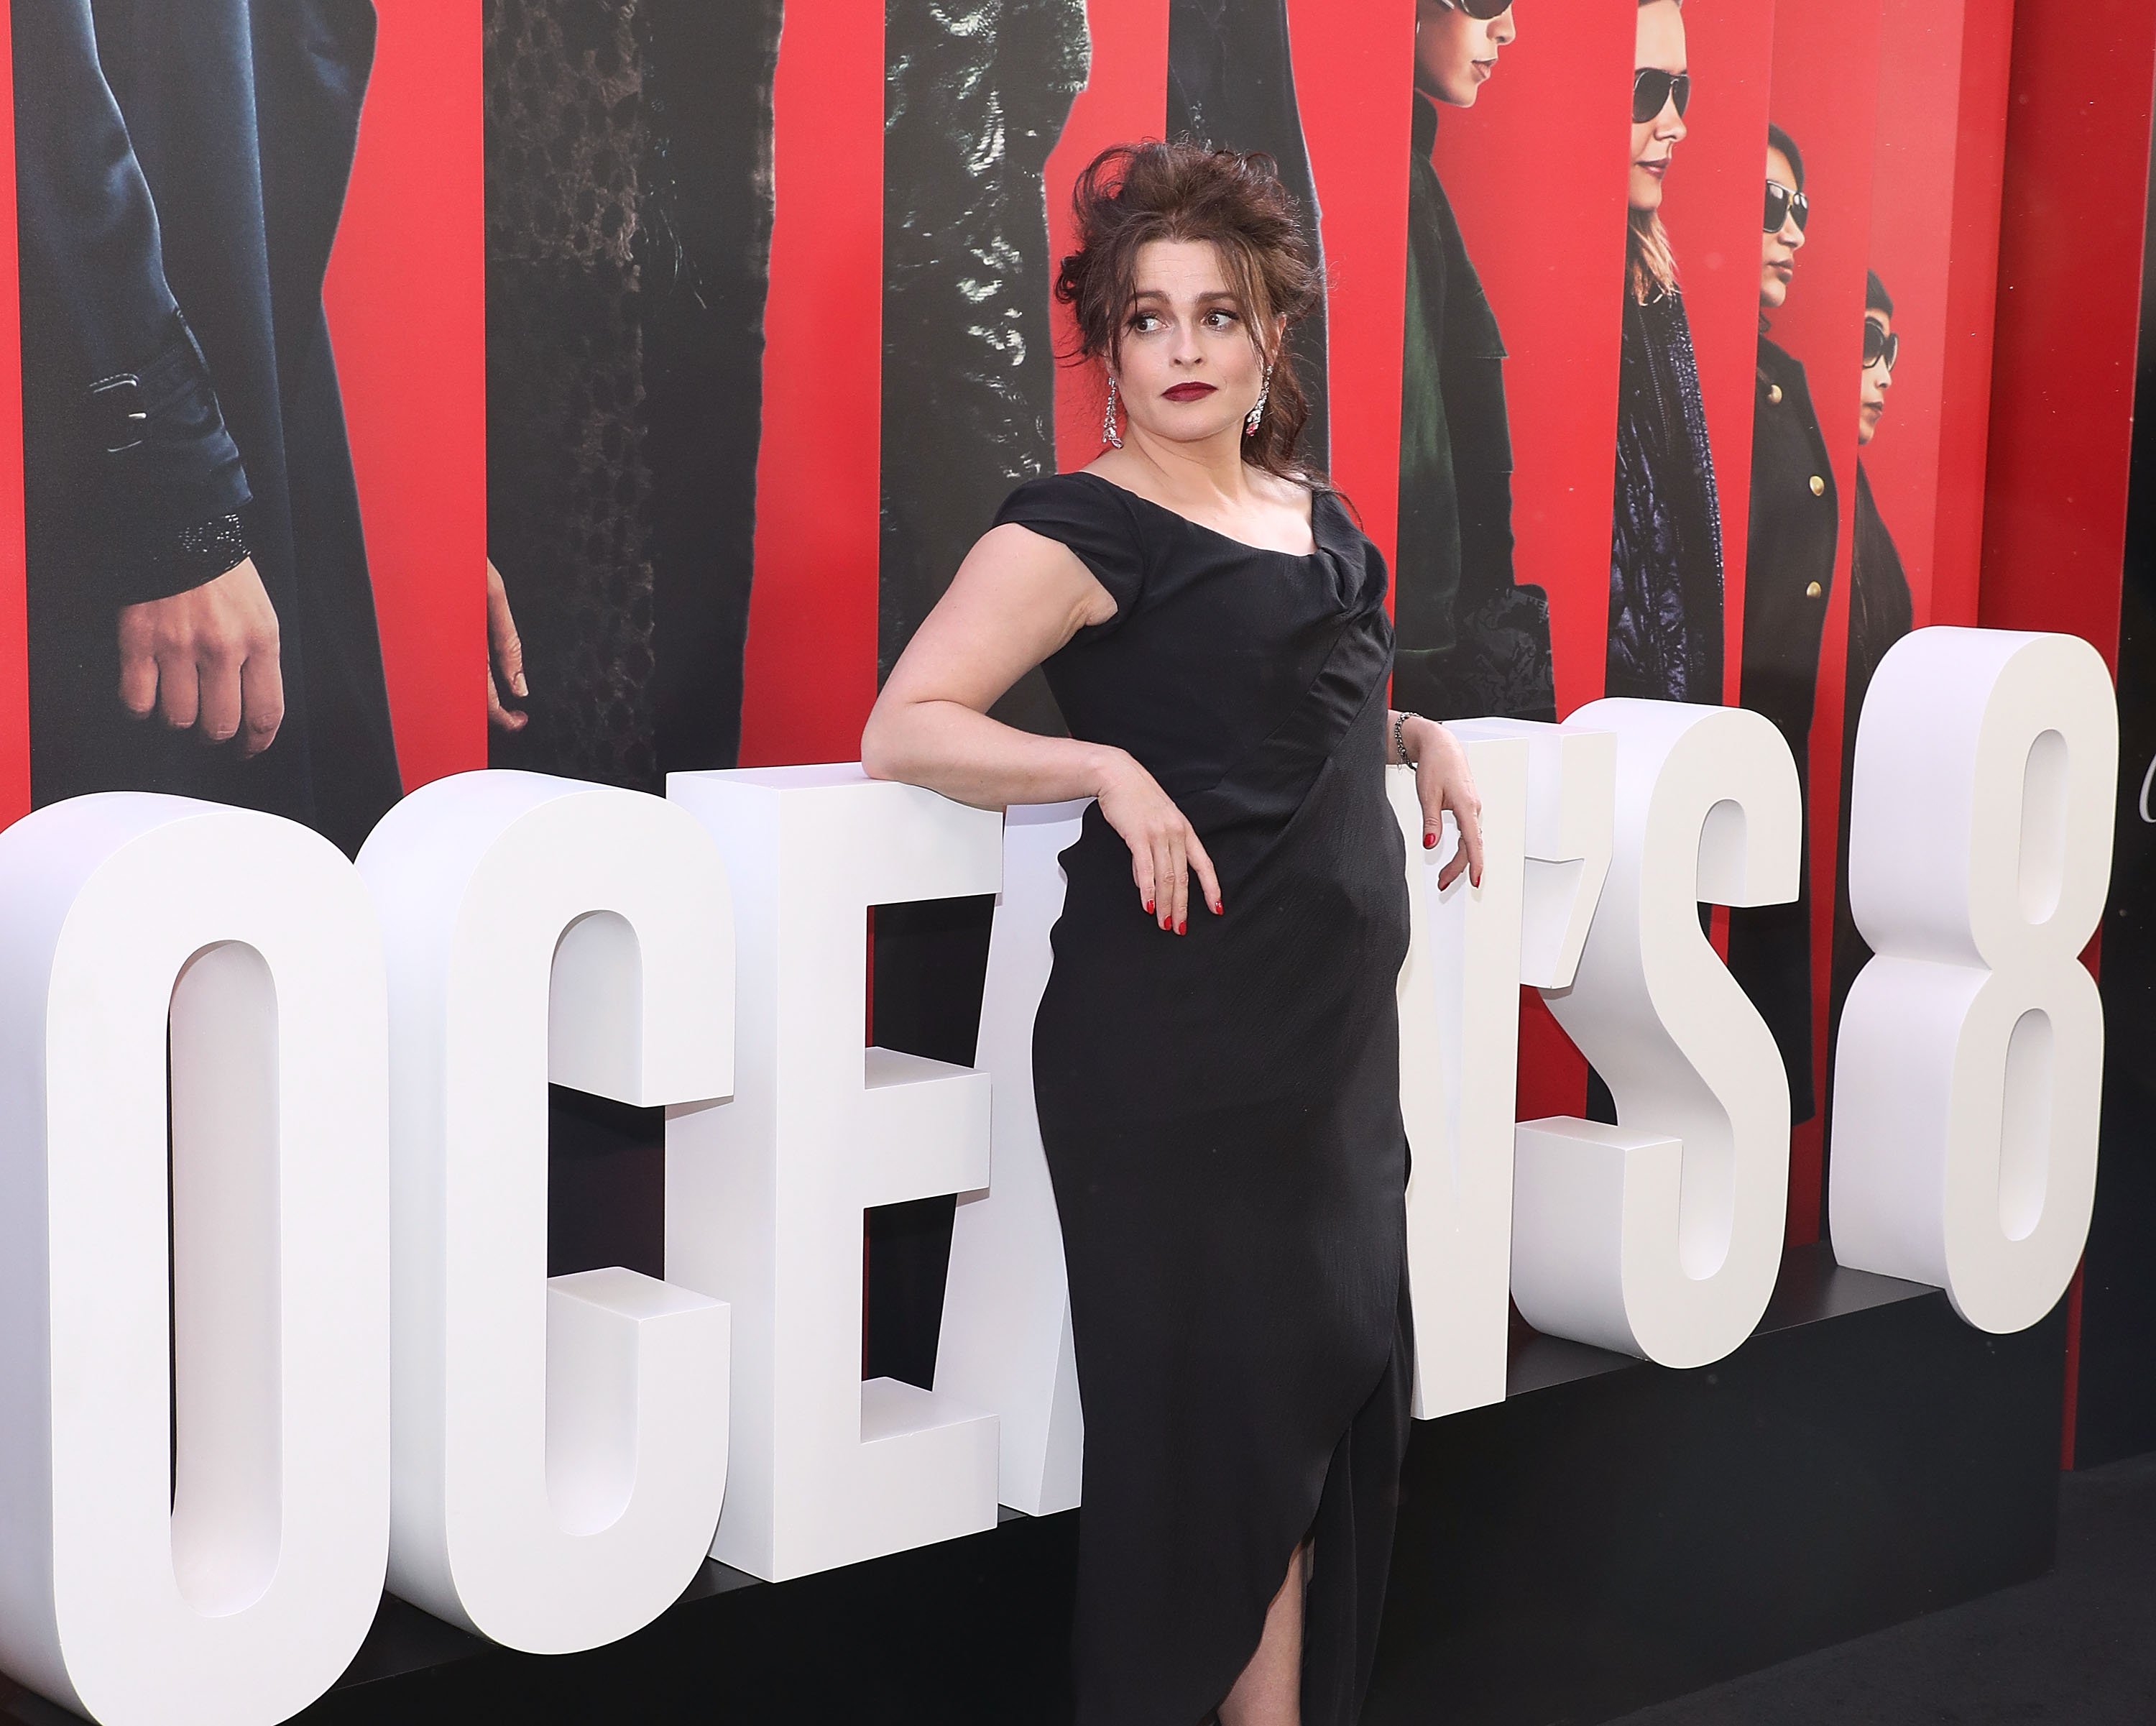 Helena Bonham Carter attends the world premiere of "Ocean's 8" at Alice Tully Hall at Lincoln Center on June 5, 2018 in New York City. | Source: Getty Images